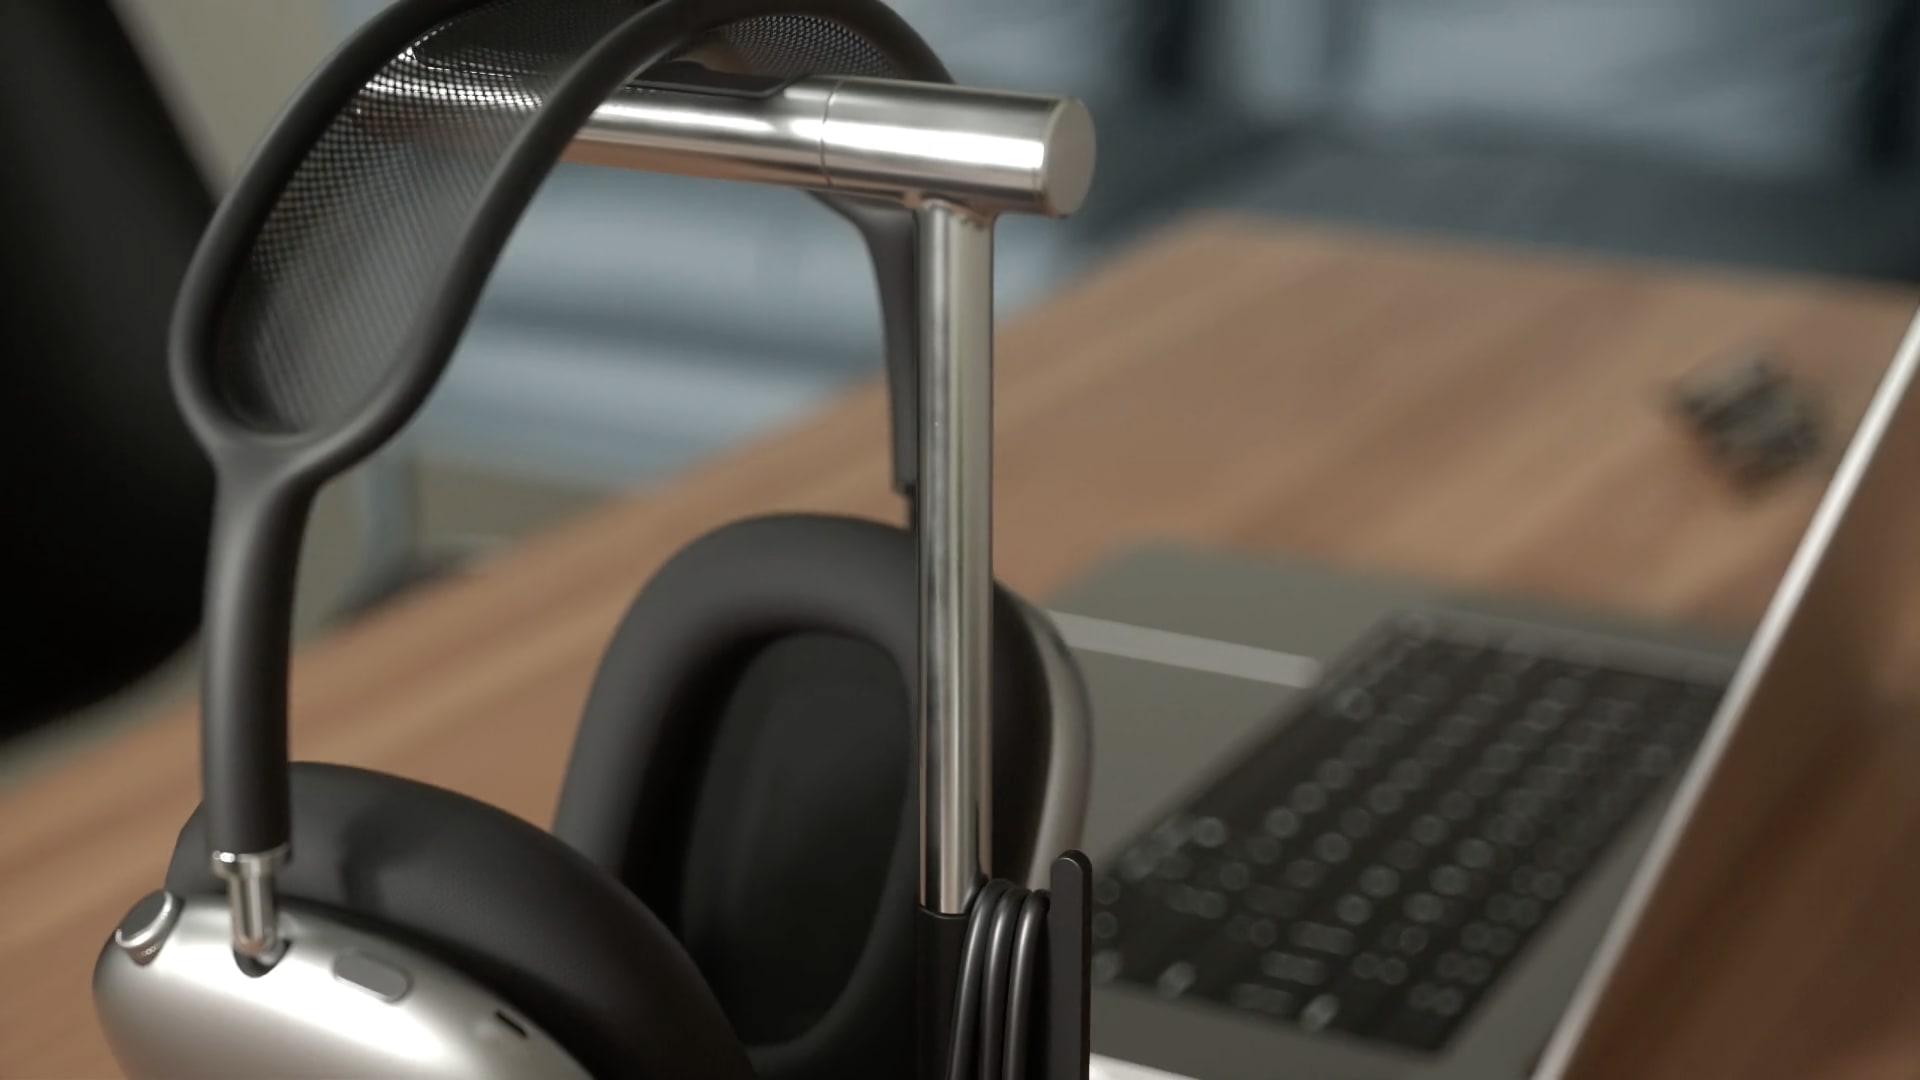 A still image from Satechi's promotional video showing the top of its 2-in-1 Headphone Stand with Wireless Charger with AirPods Max resting on it